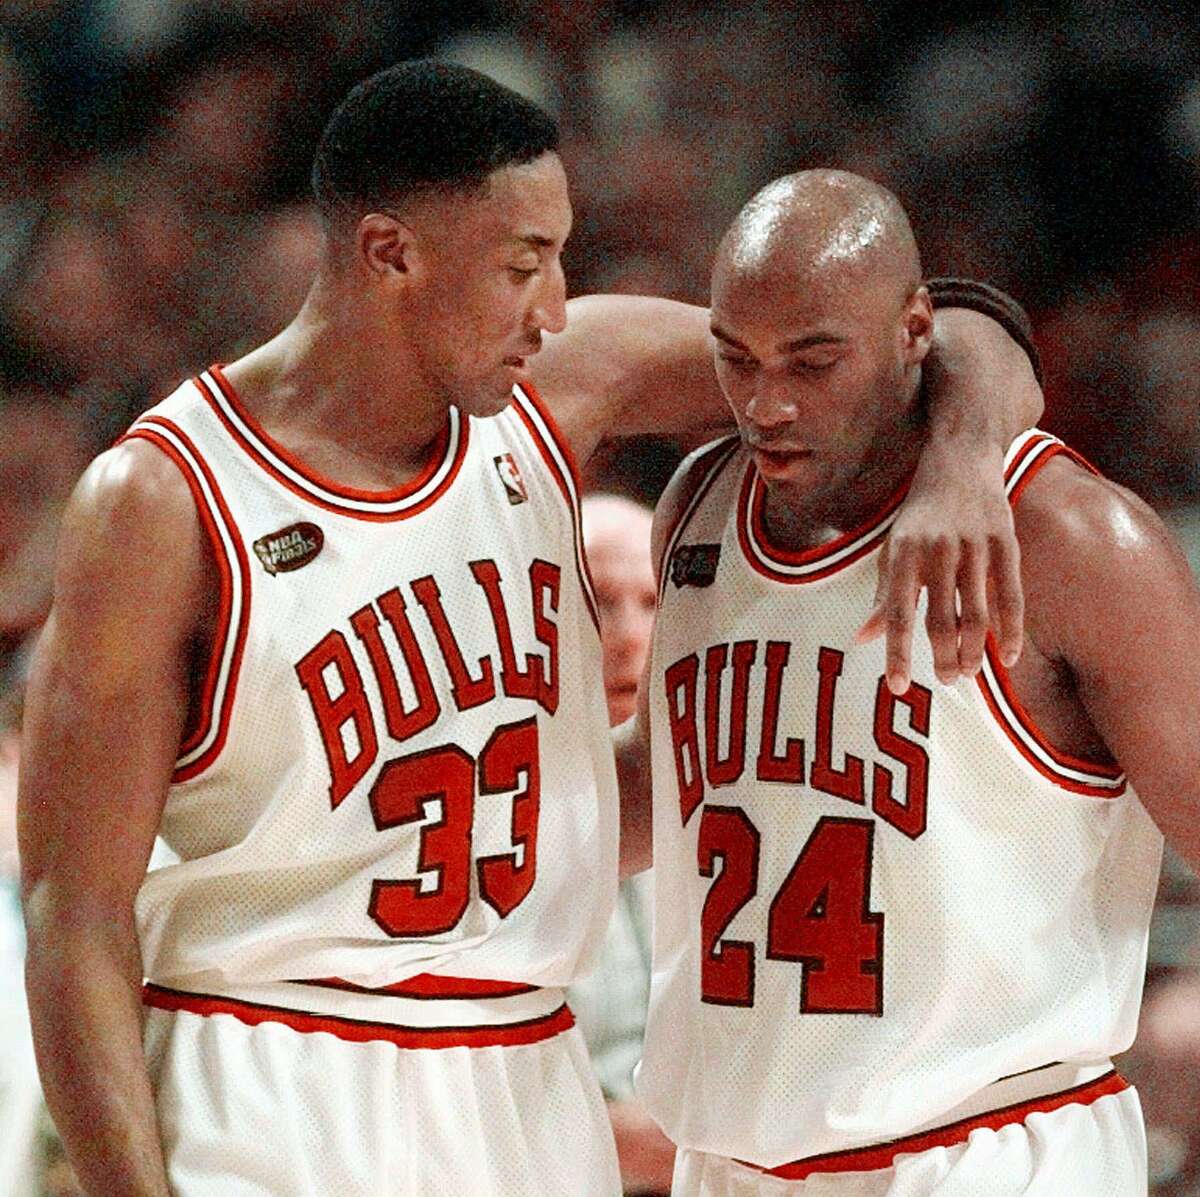 Scottie Pippen (33) speaks with teammate Scott Burrell during the second half of Game 3 of the 1998 NBA Finals.